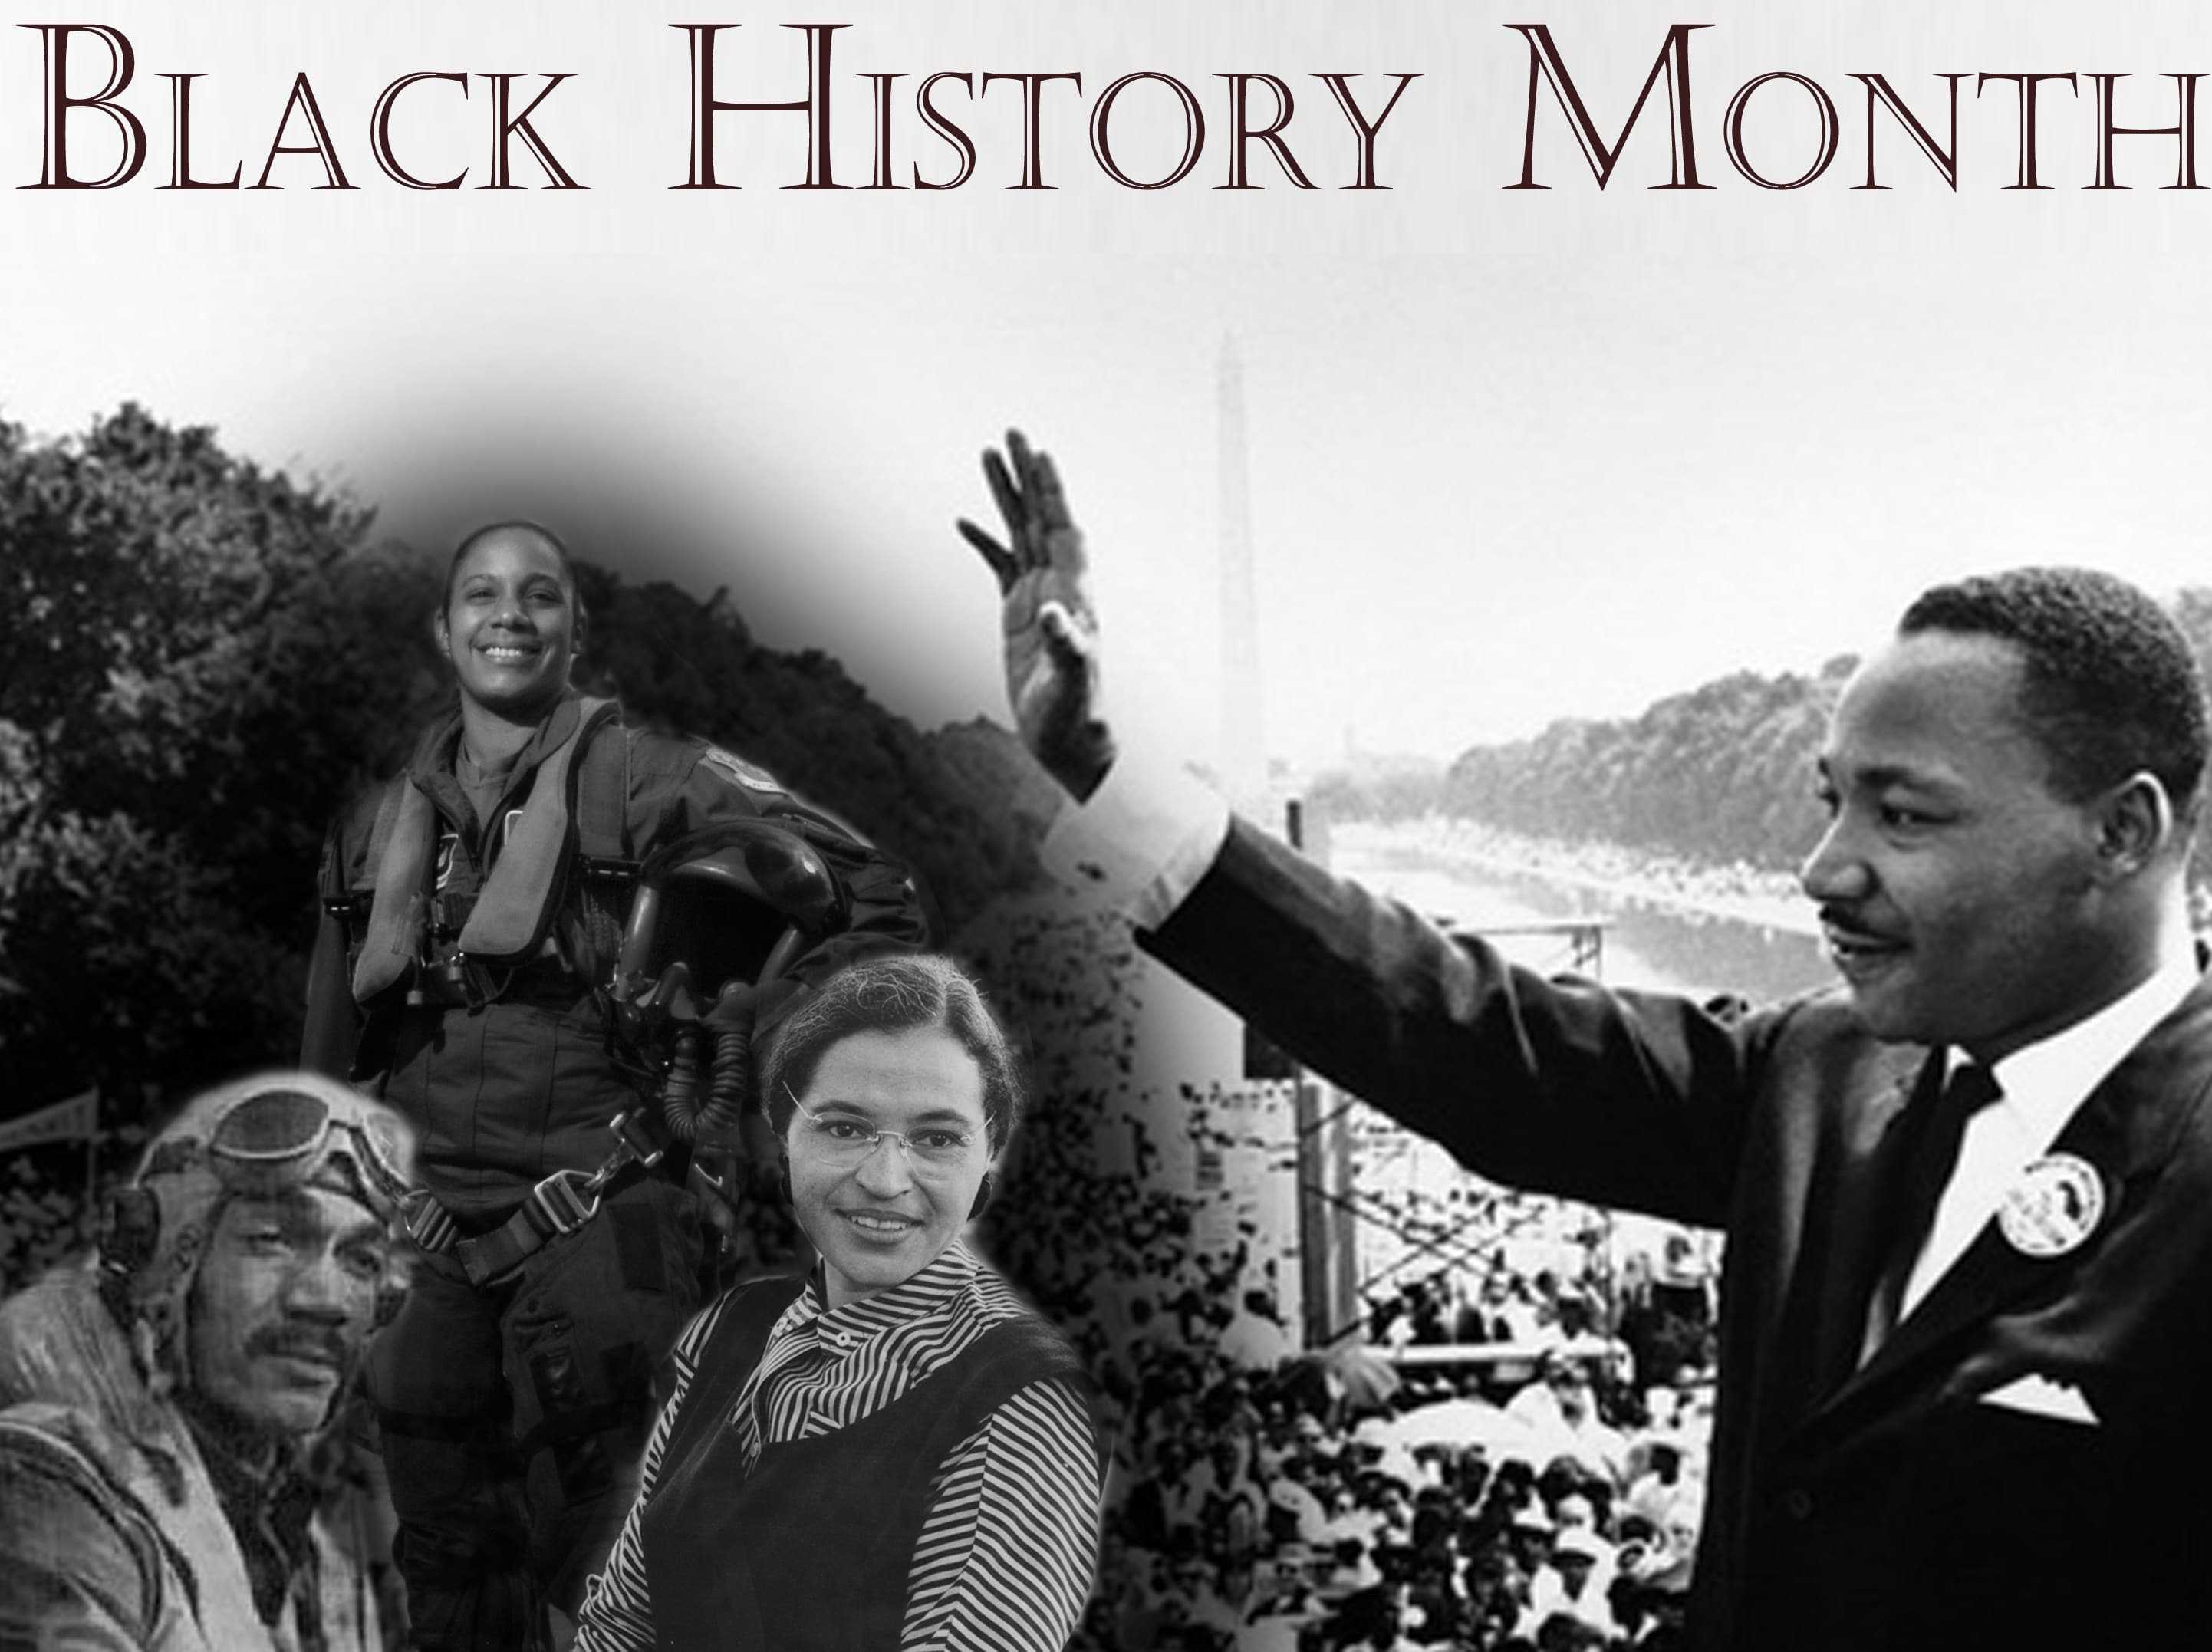 Black History Month Wallpaper - Kolpaper - Awesome Free Hd Wallpapers